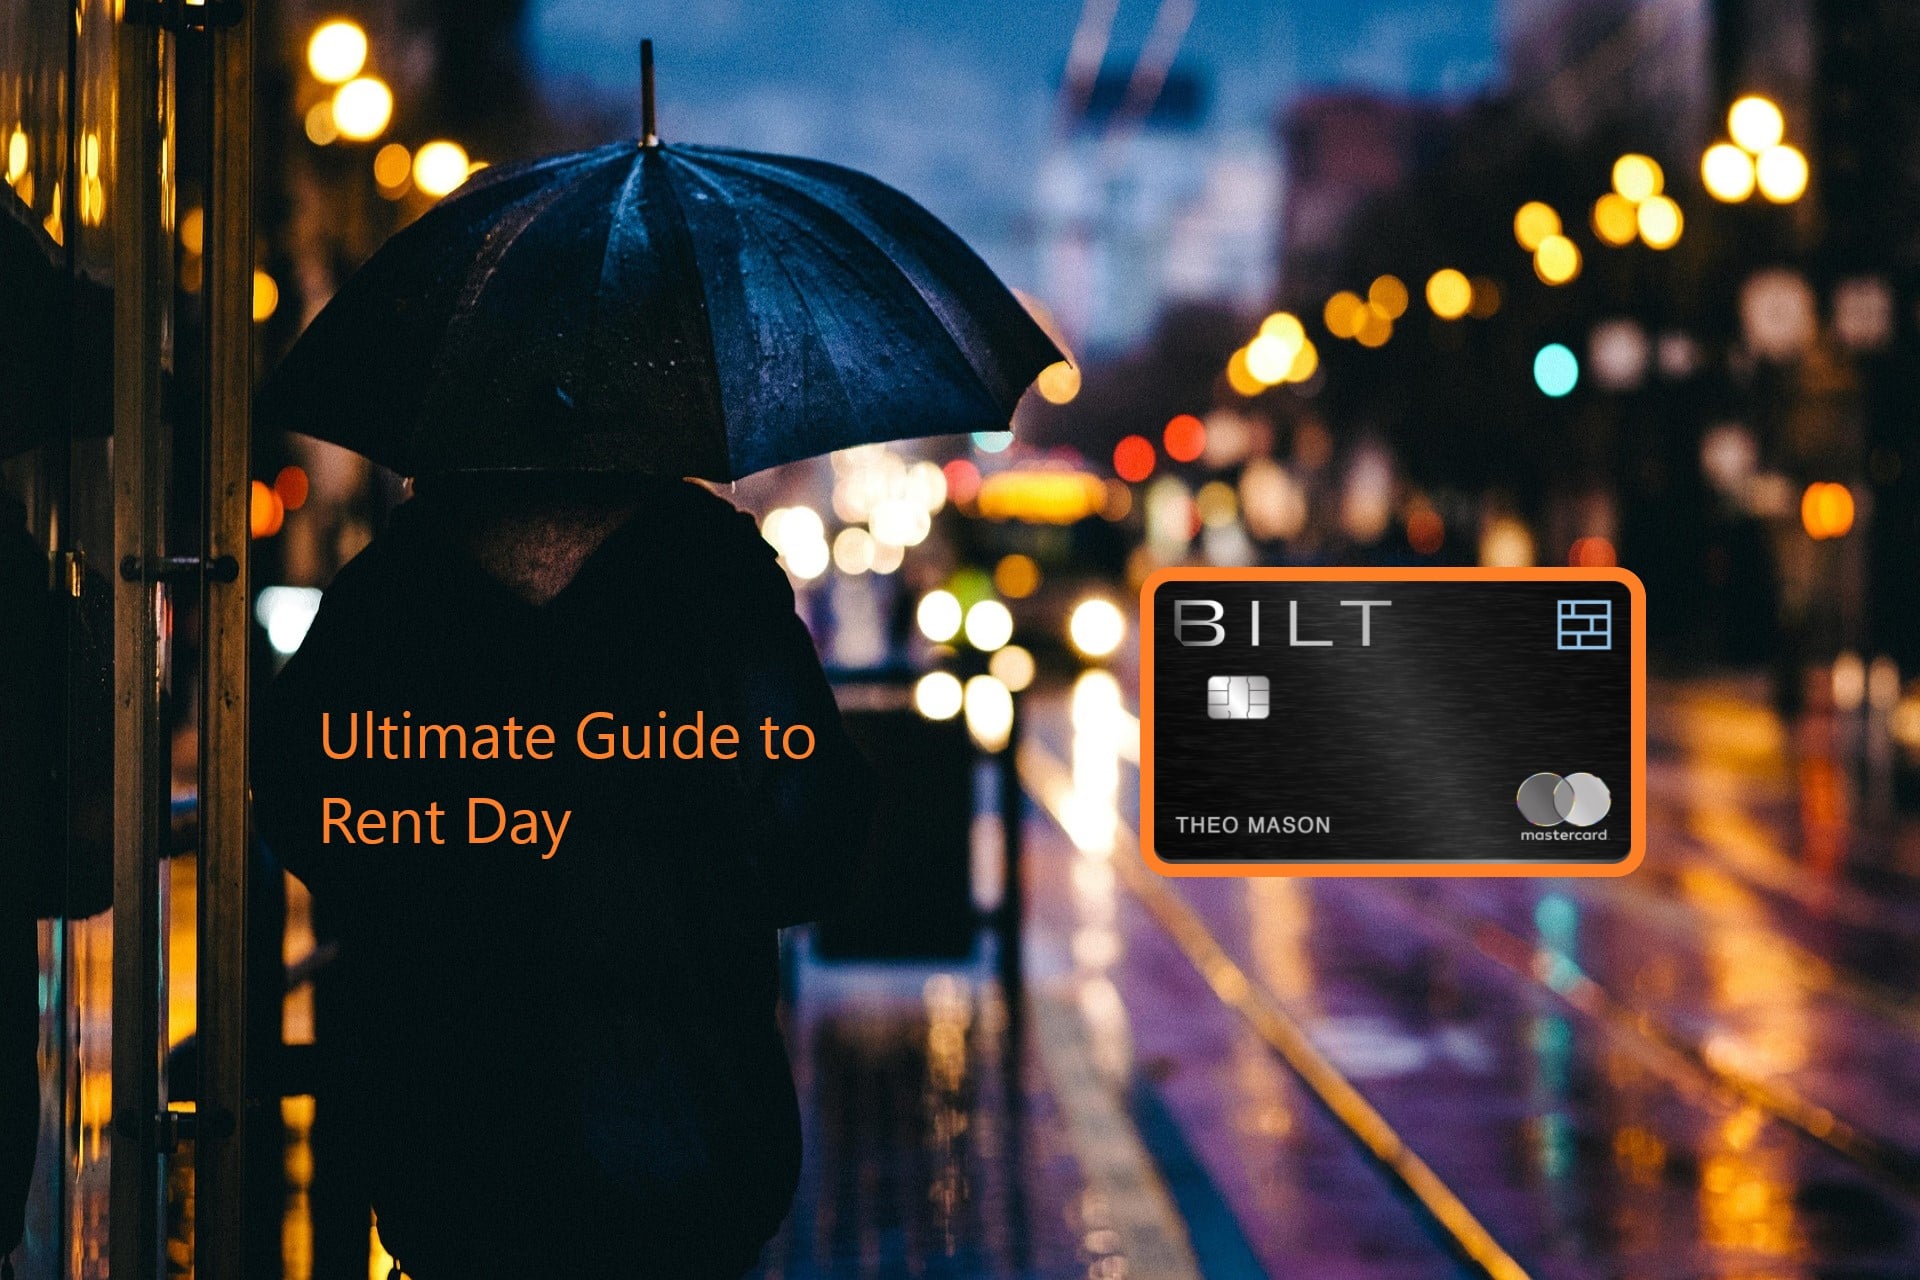 Your guide to Bilt Rent Day this month with the Bilt Mastercard